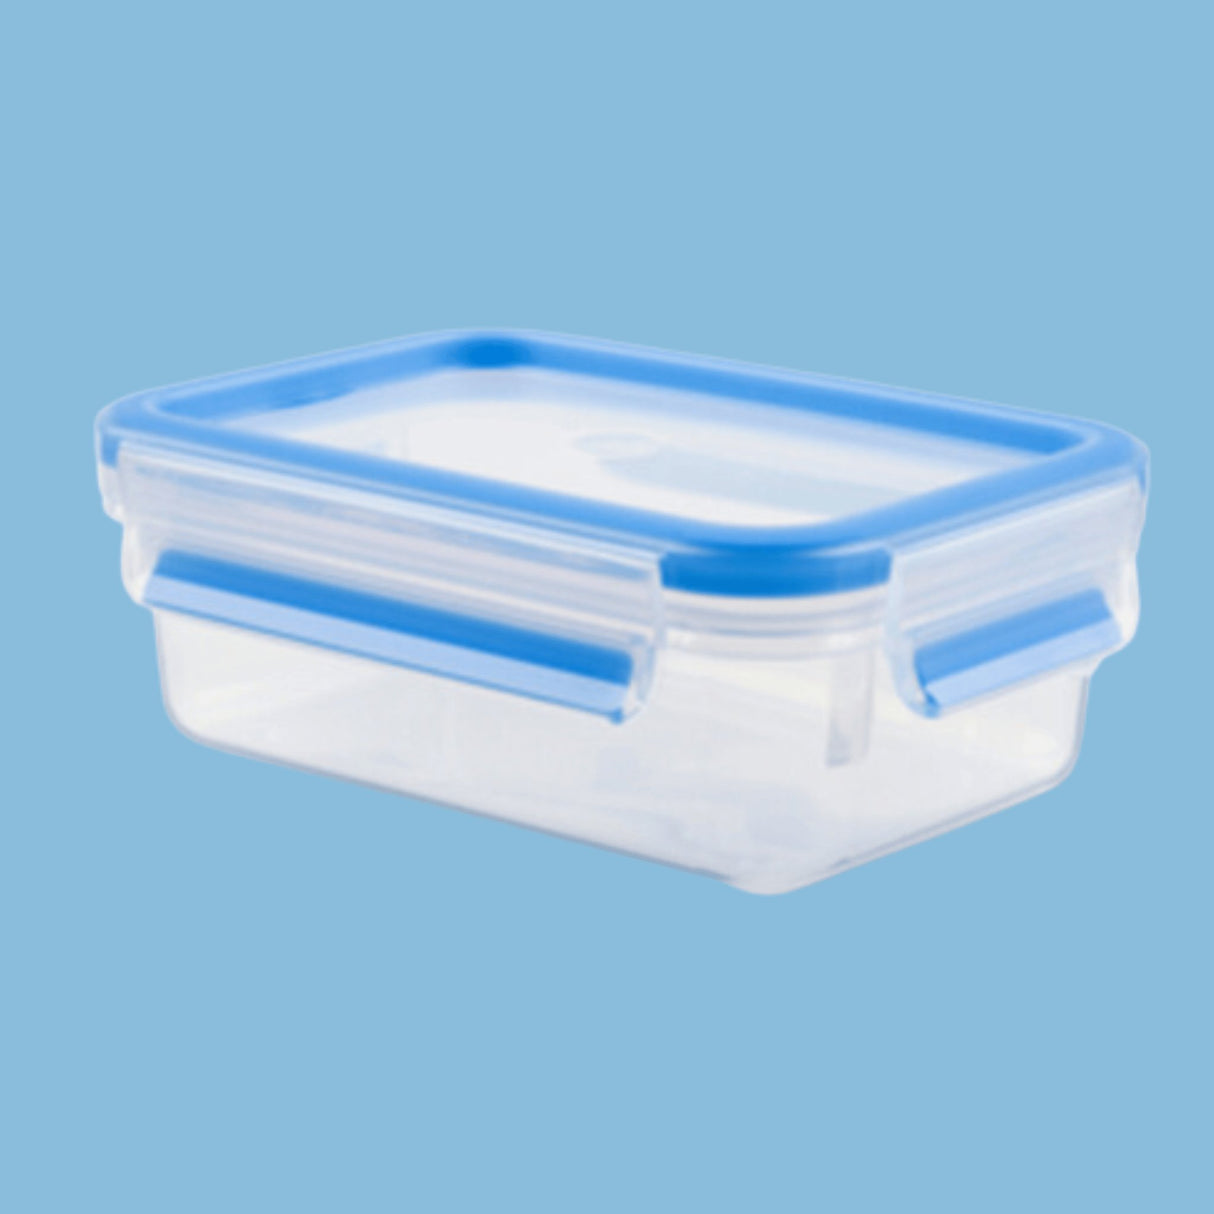 Tefal  0.55L Masterseal Fresh Box Food Container K3021112 - KWT Tech Mart